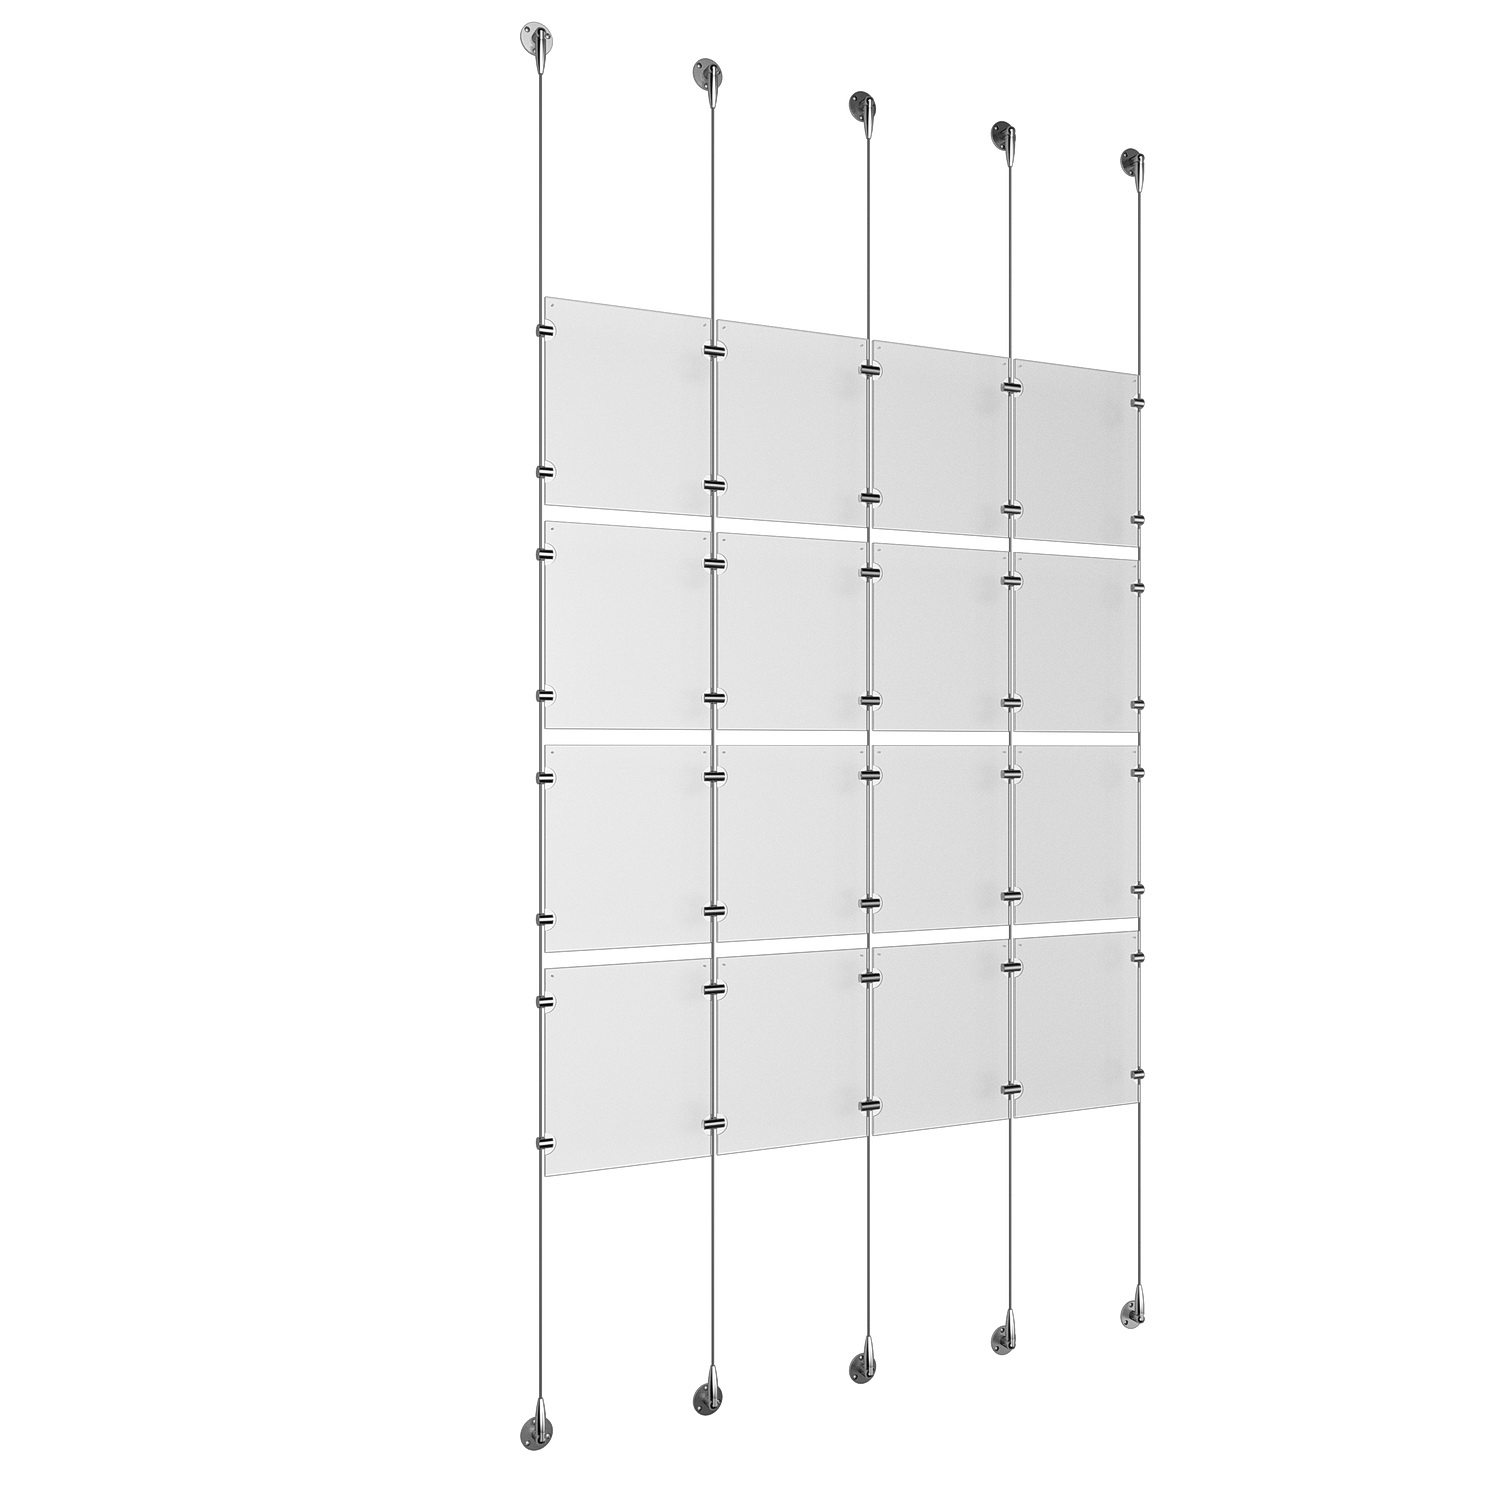 (16) 8-1/2'' Width x 11'' Height Clear Acrylic Frame & (5) Stainless Steel Satin Brushed Adjustable Angle Signature 1/8'' Cable Systems with (16) Single-Sided Panel Grippers (24) Double-Sided Panel Grippers